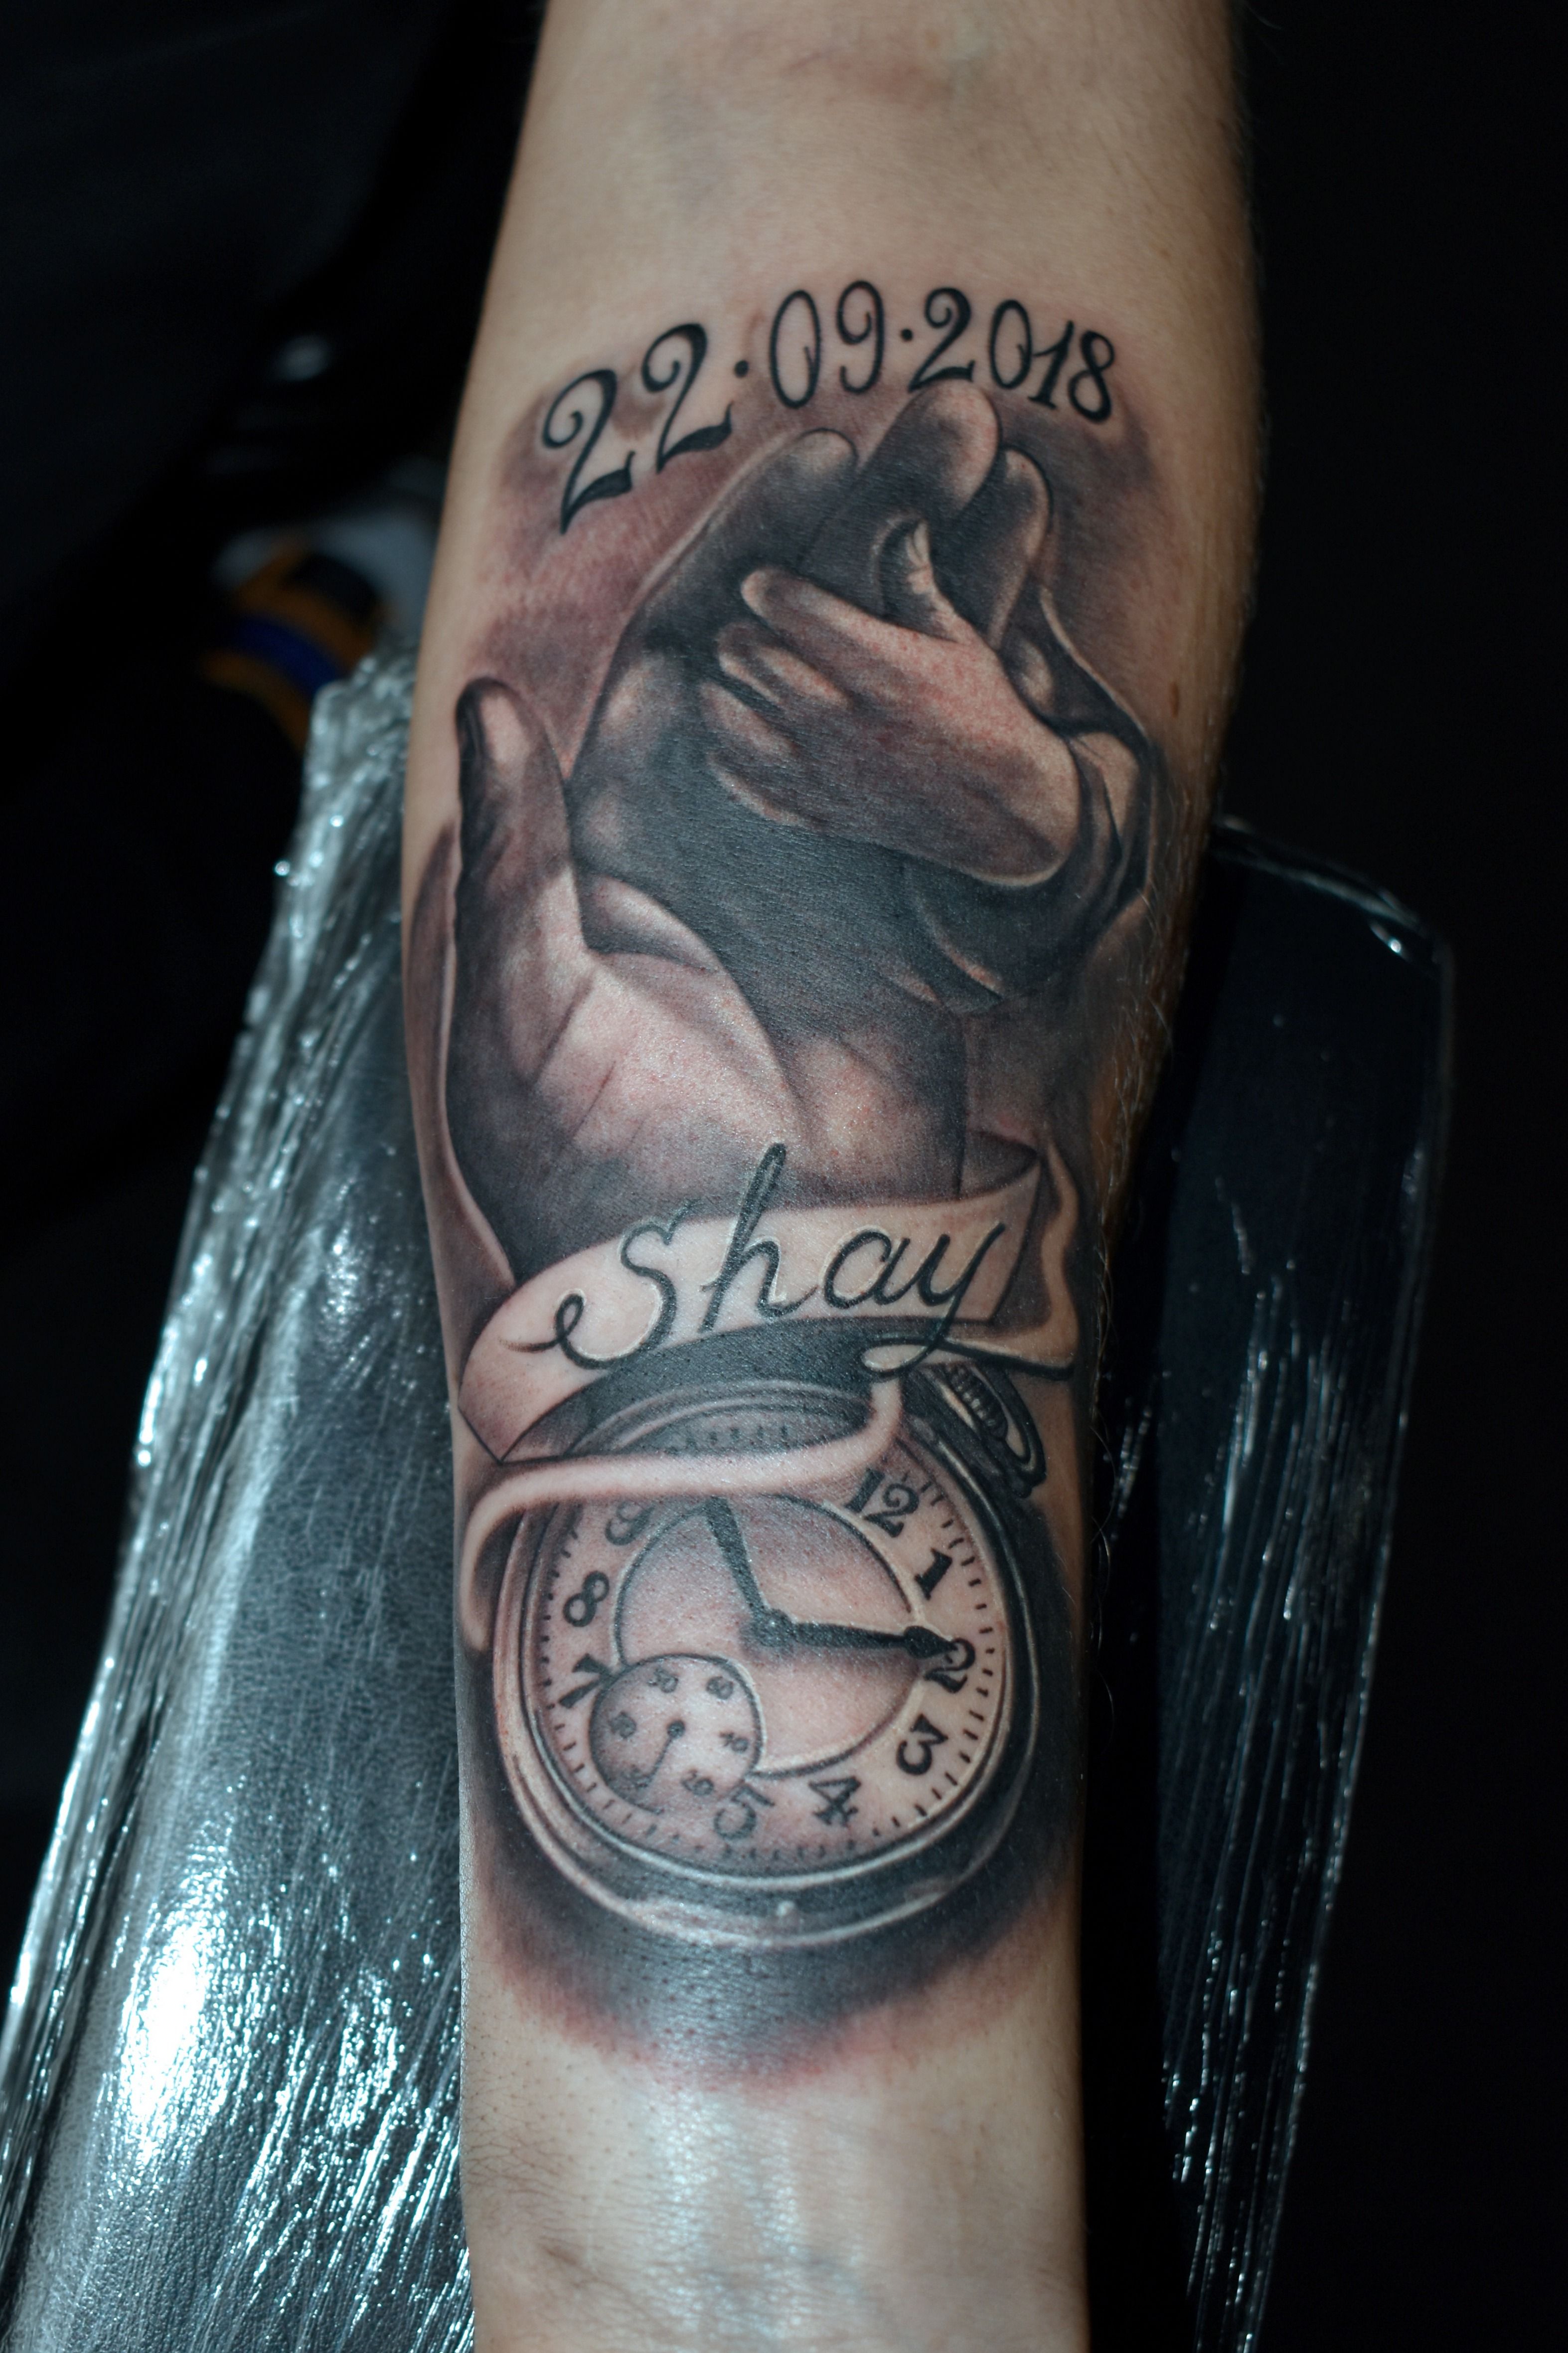 Tattoo uploaded by Chris Dreadfullrat • customer's tribute to his newborn,  from his family photo! #blackandgrey #newborn #child #baby #hands  #pocketwatch #family #father • Tattoodo